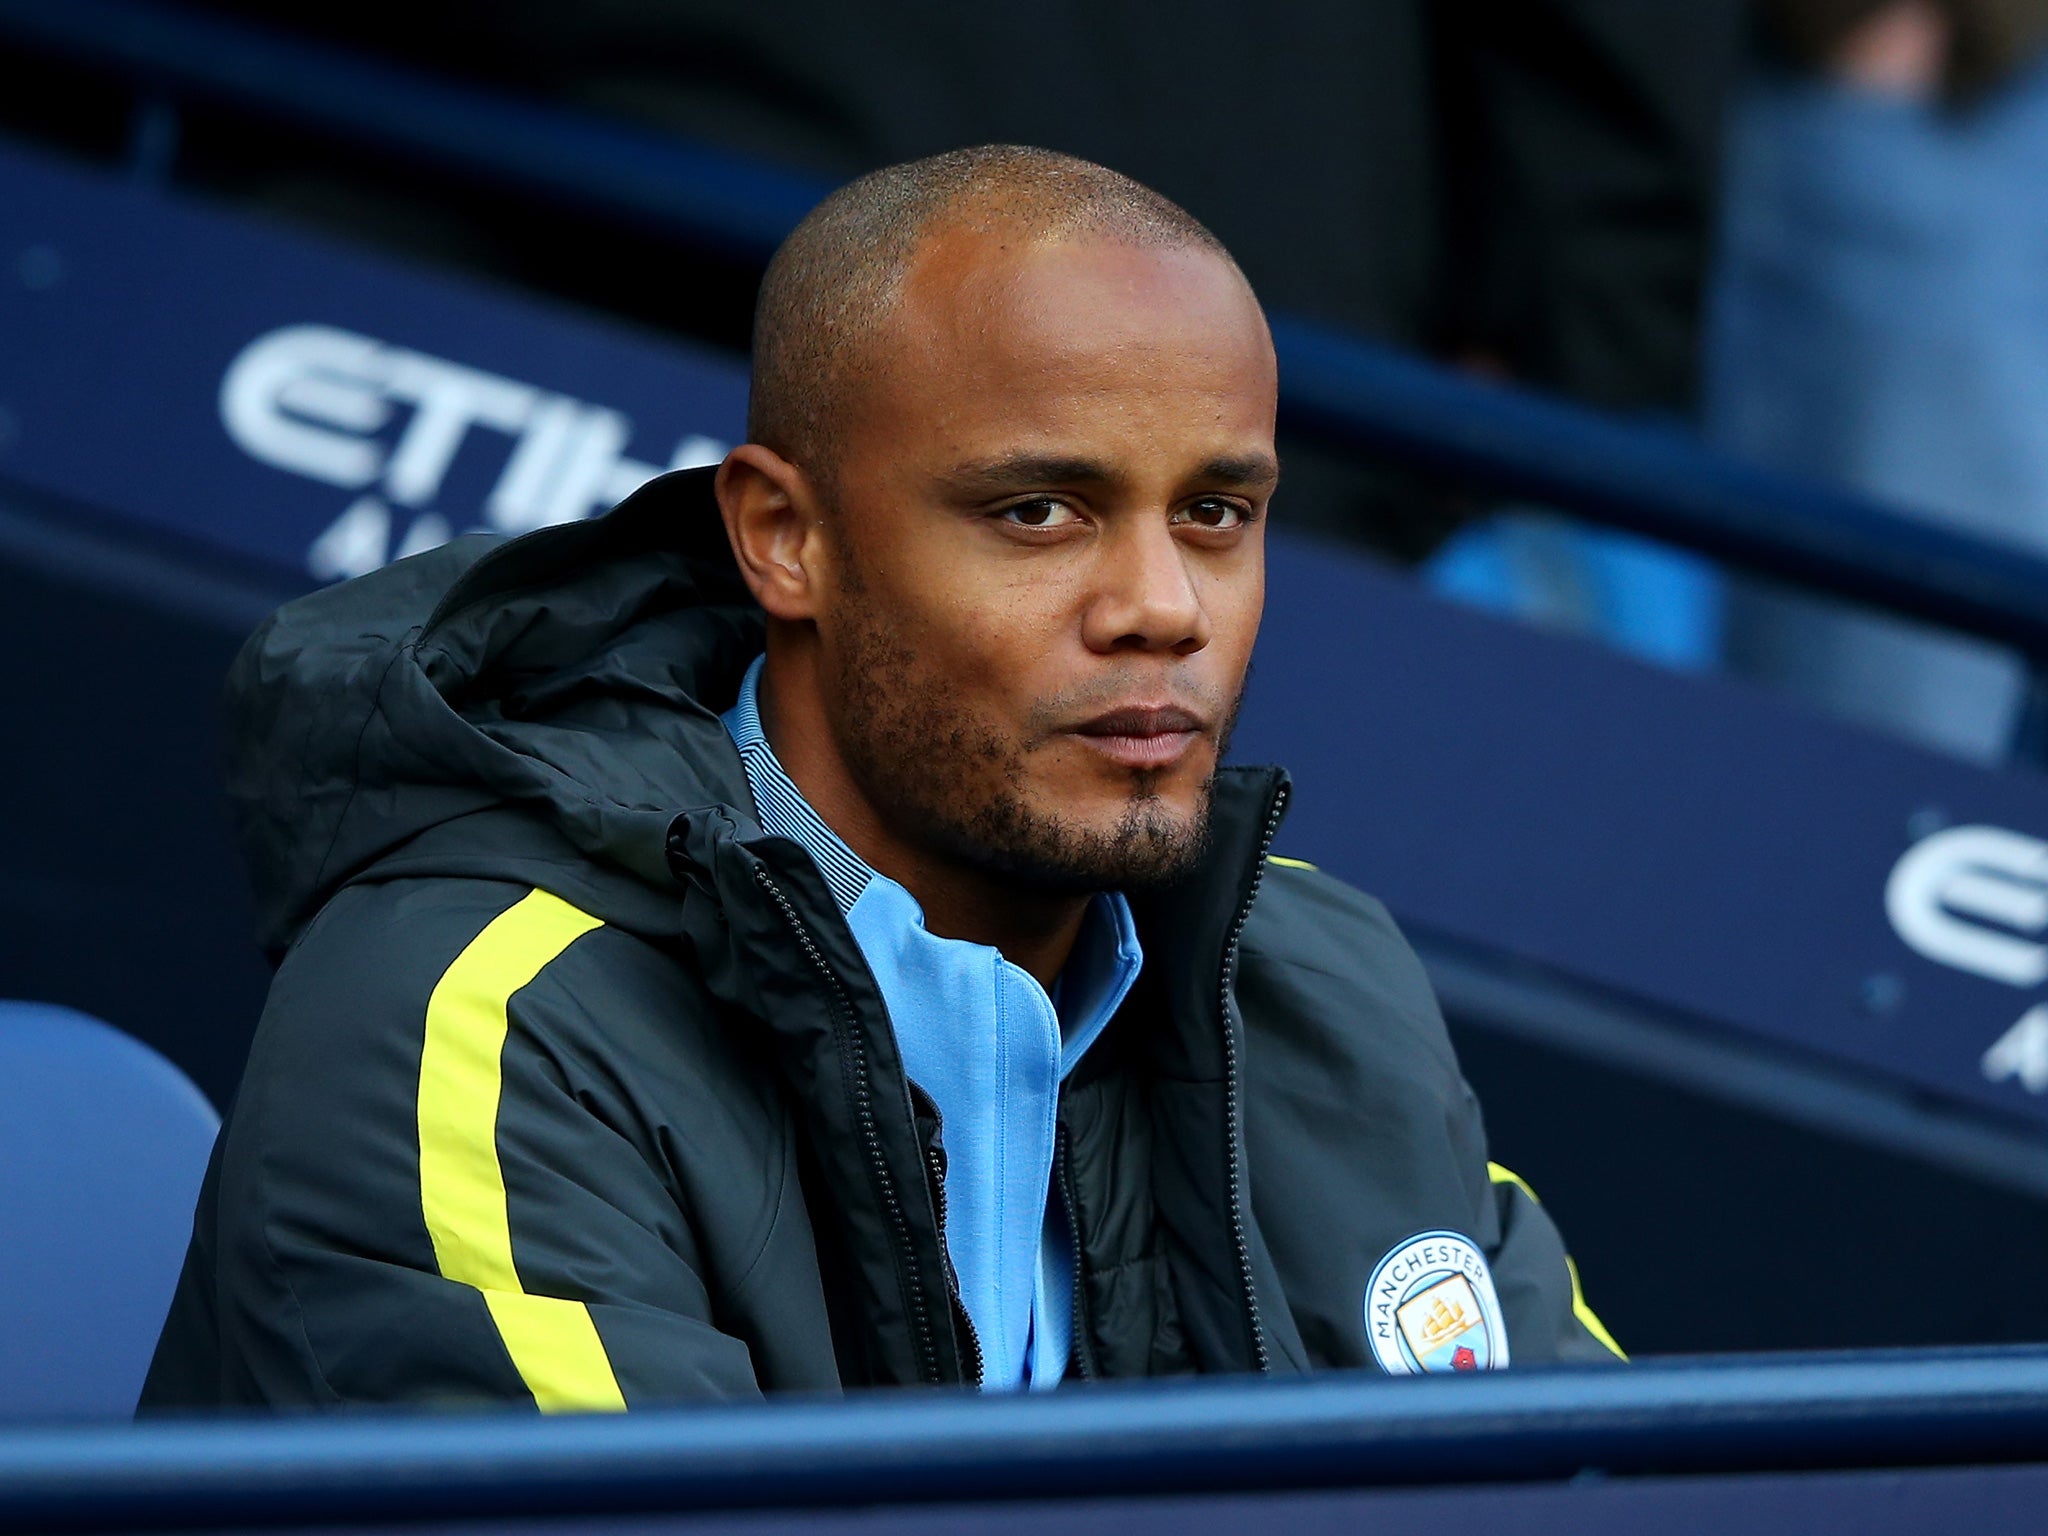 Kompany has made just two appearances for City this season, one from the substitutes' bench